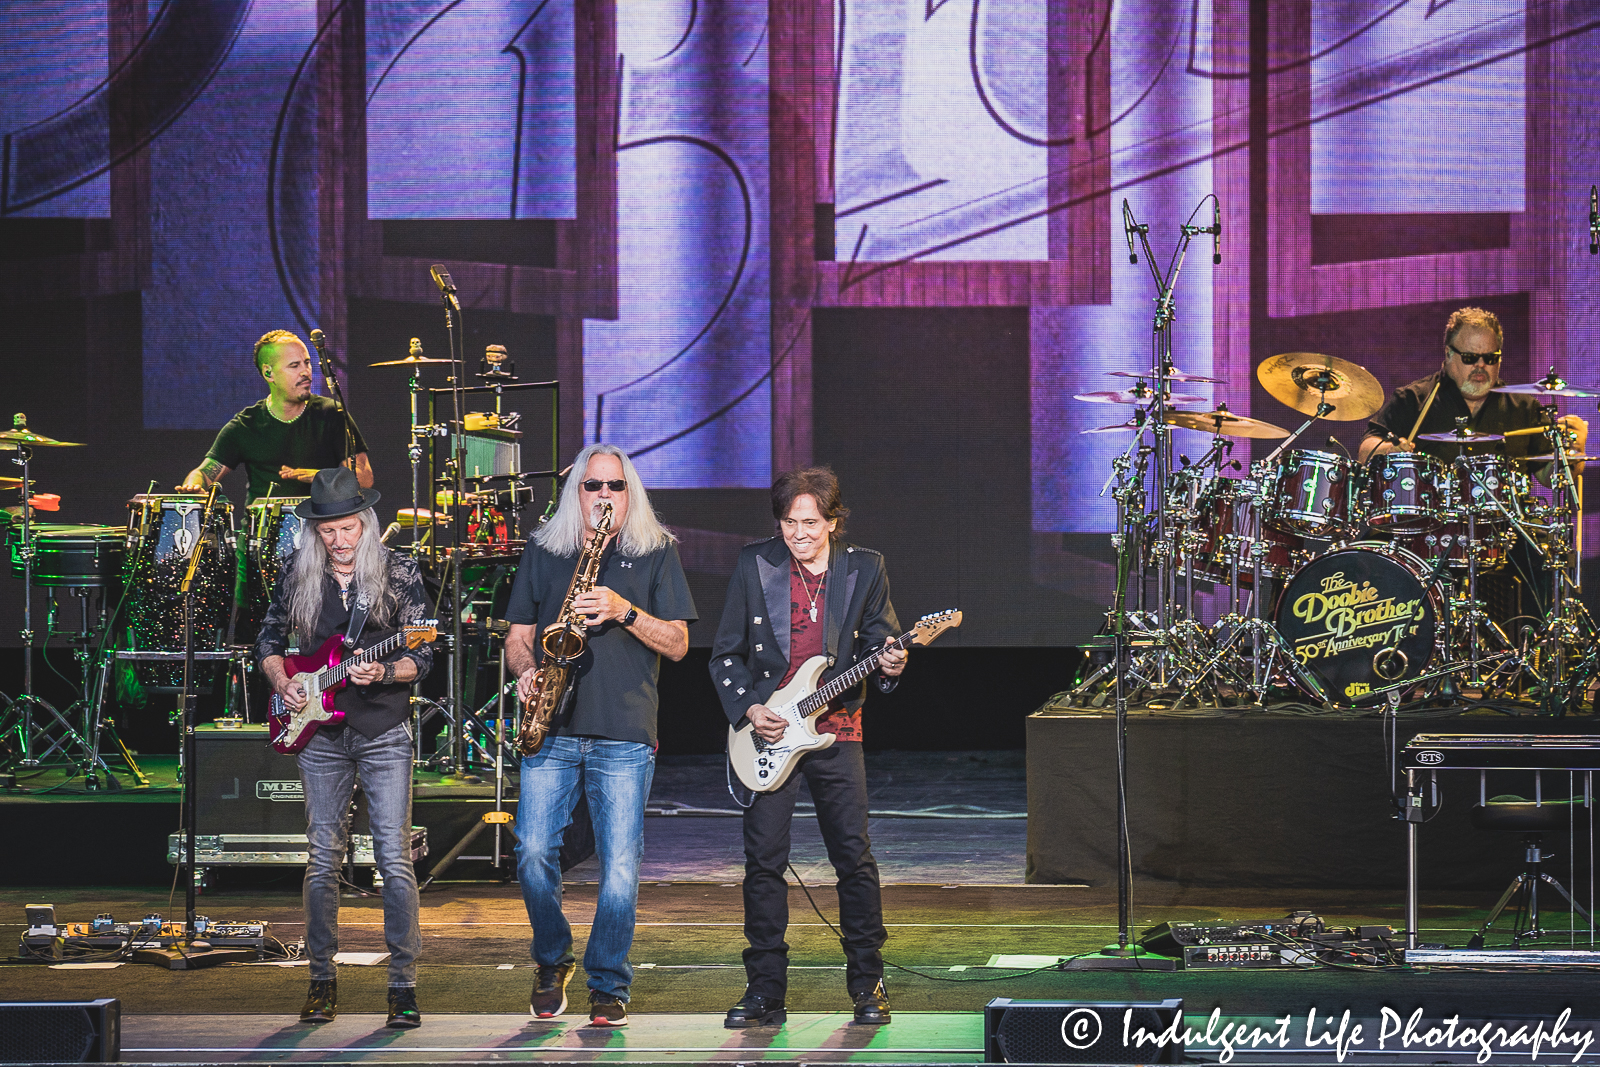 Live concert performance featuring The Doobie Brothers at Starlight Theatre in Kansas City, MO on June 14, 2023.